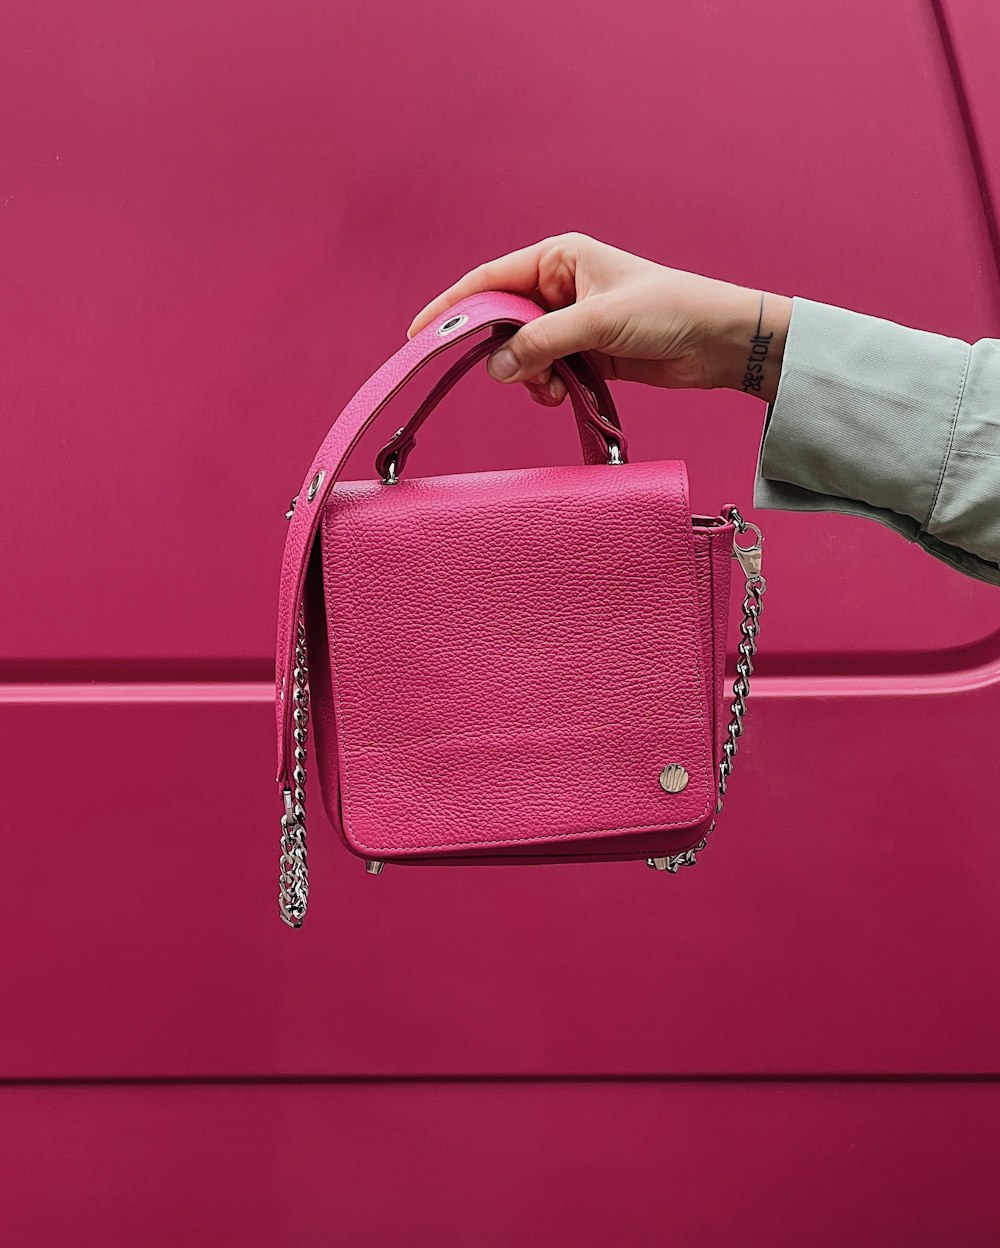 a woman's hand holding a pink purse